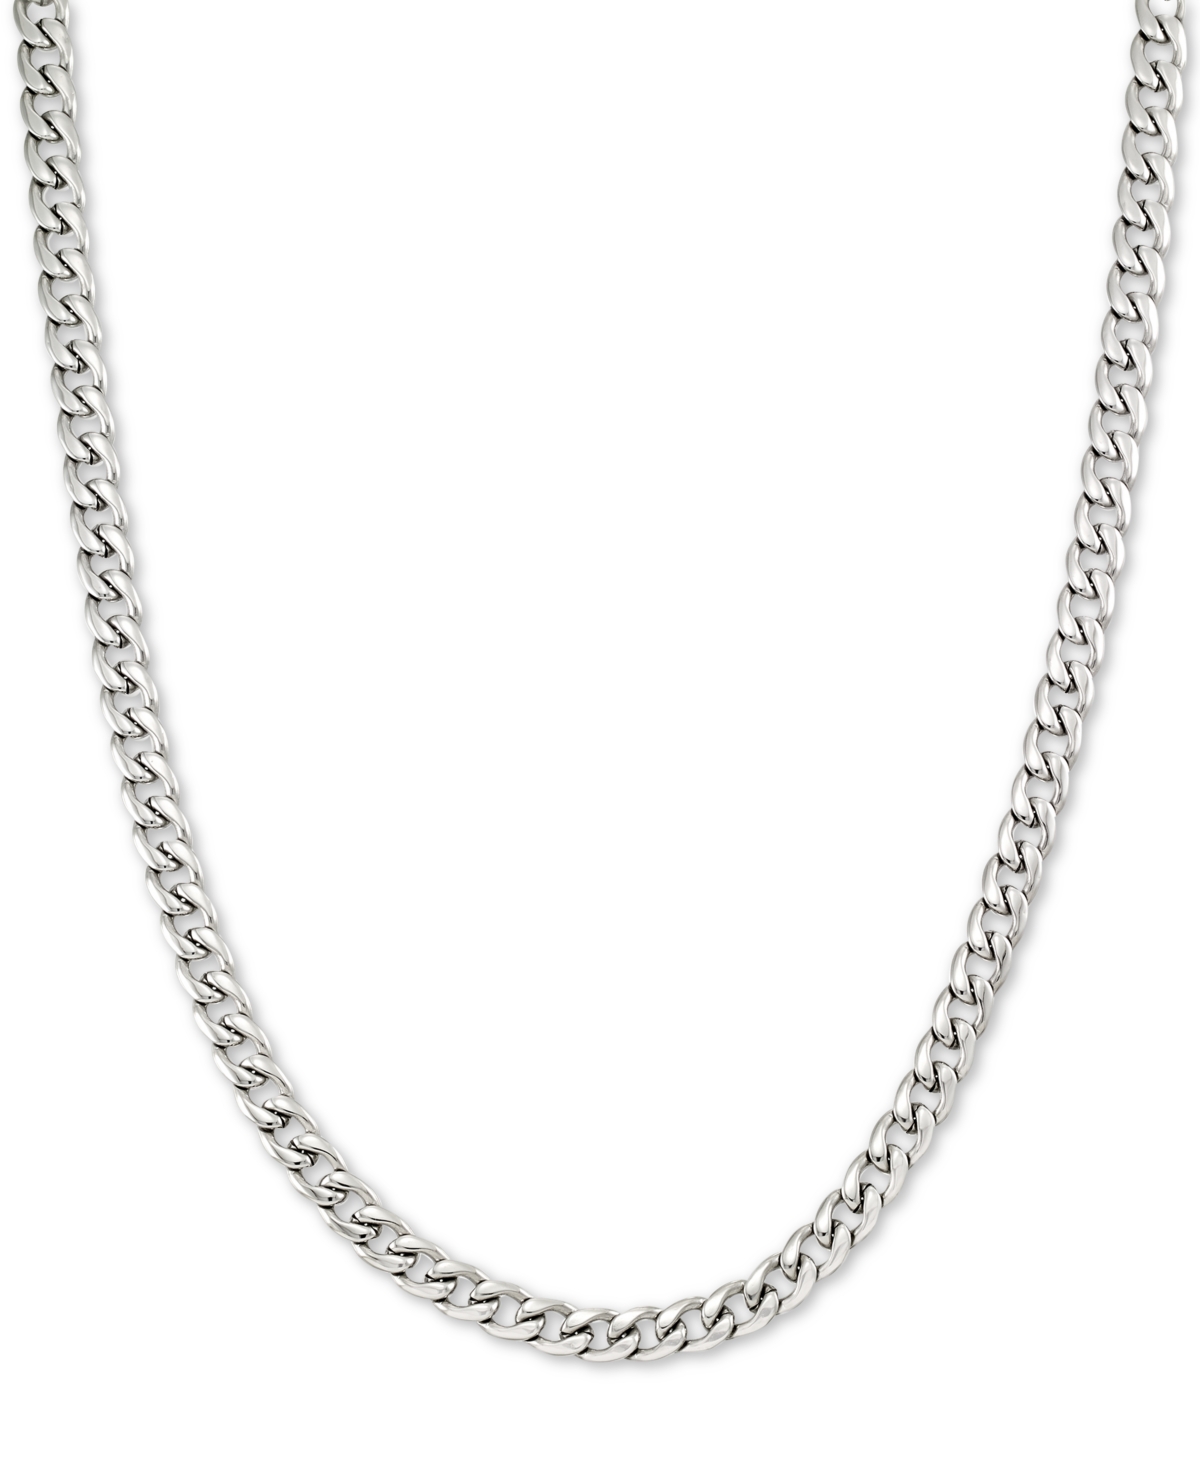 Legacy for Men by Simone I. Smith 24" Curb Chain Necklace in Stainless Steel